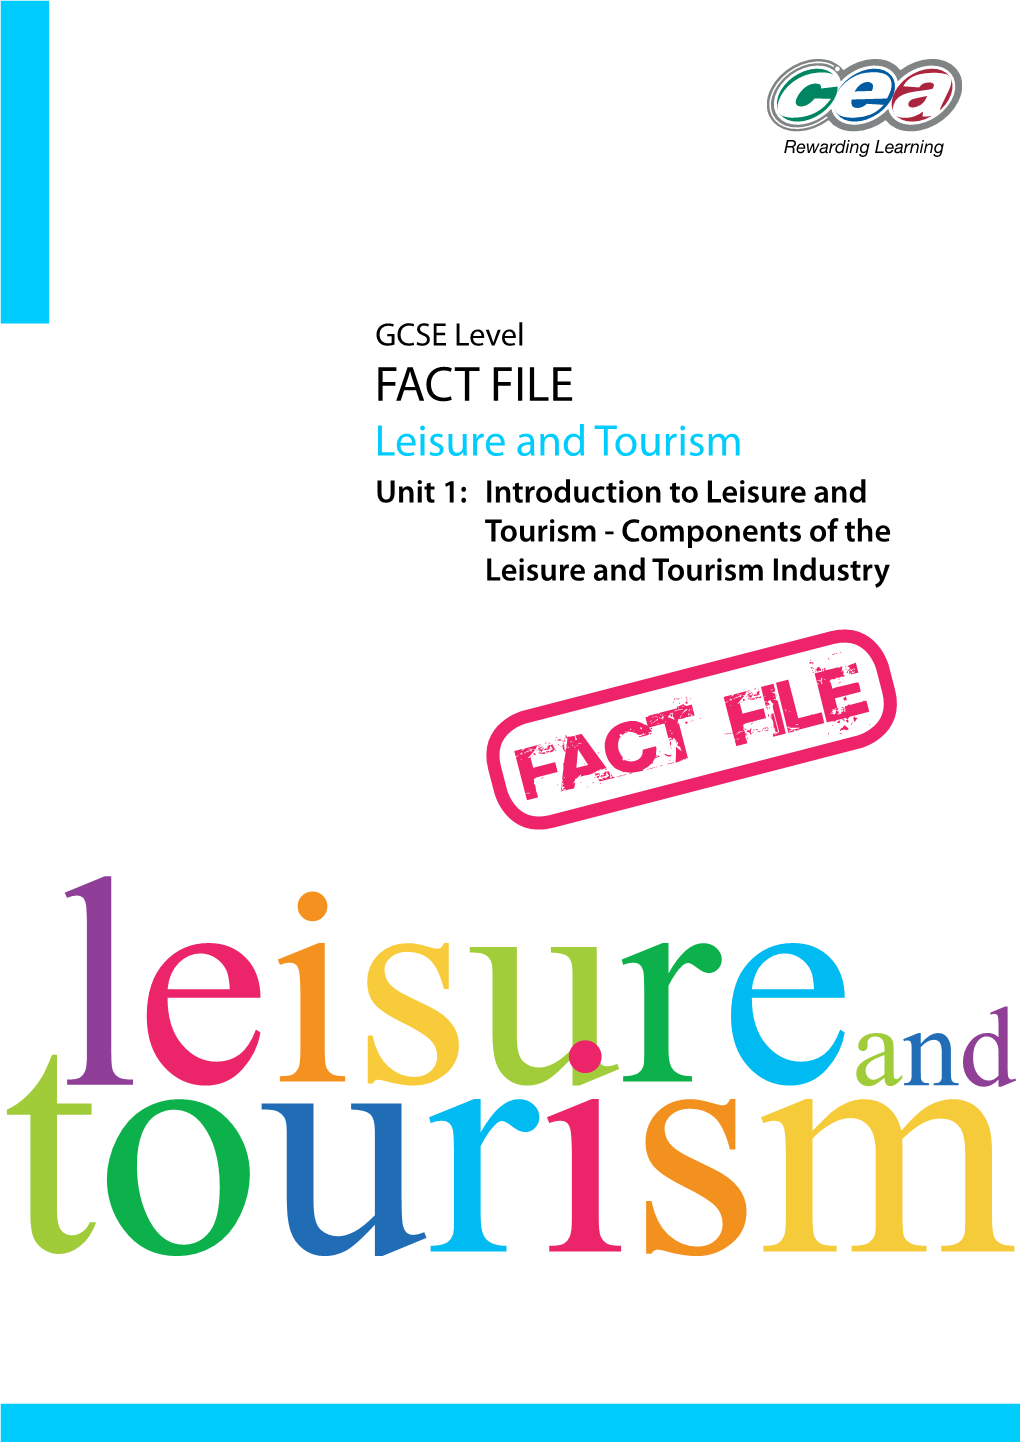 Components of the Leisure and Tourism Industry